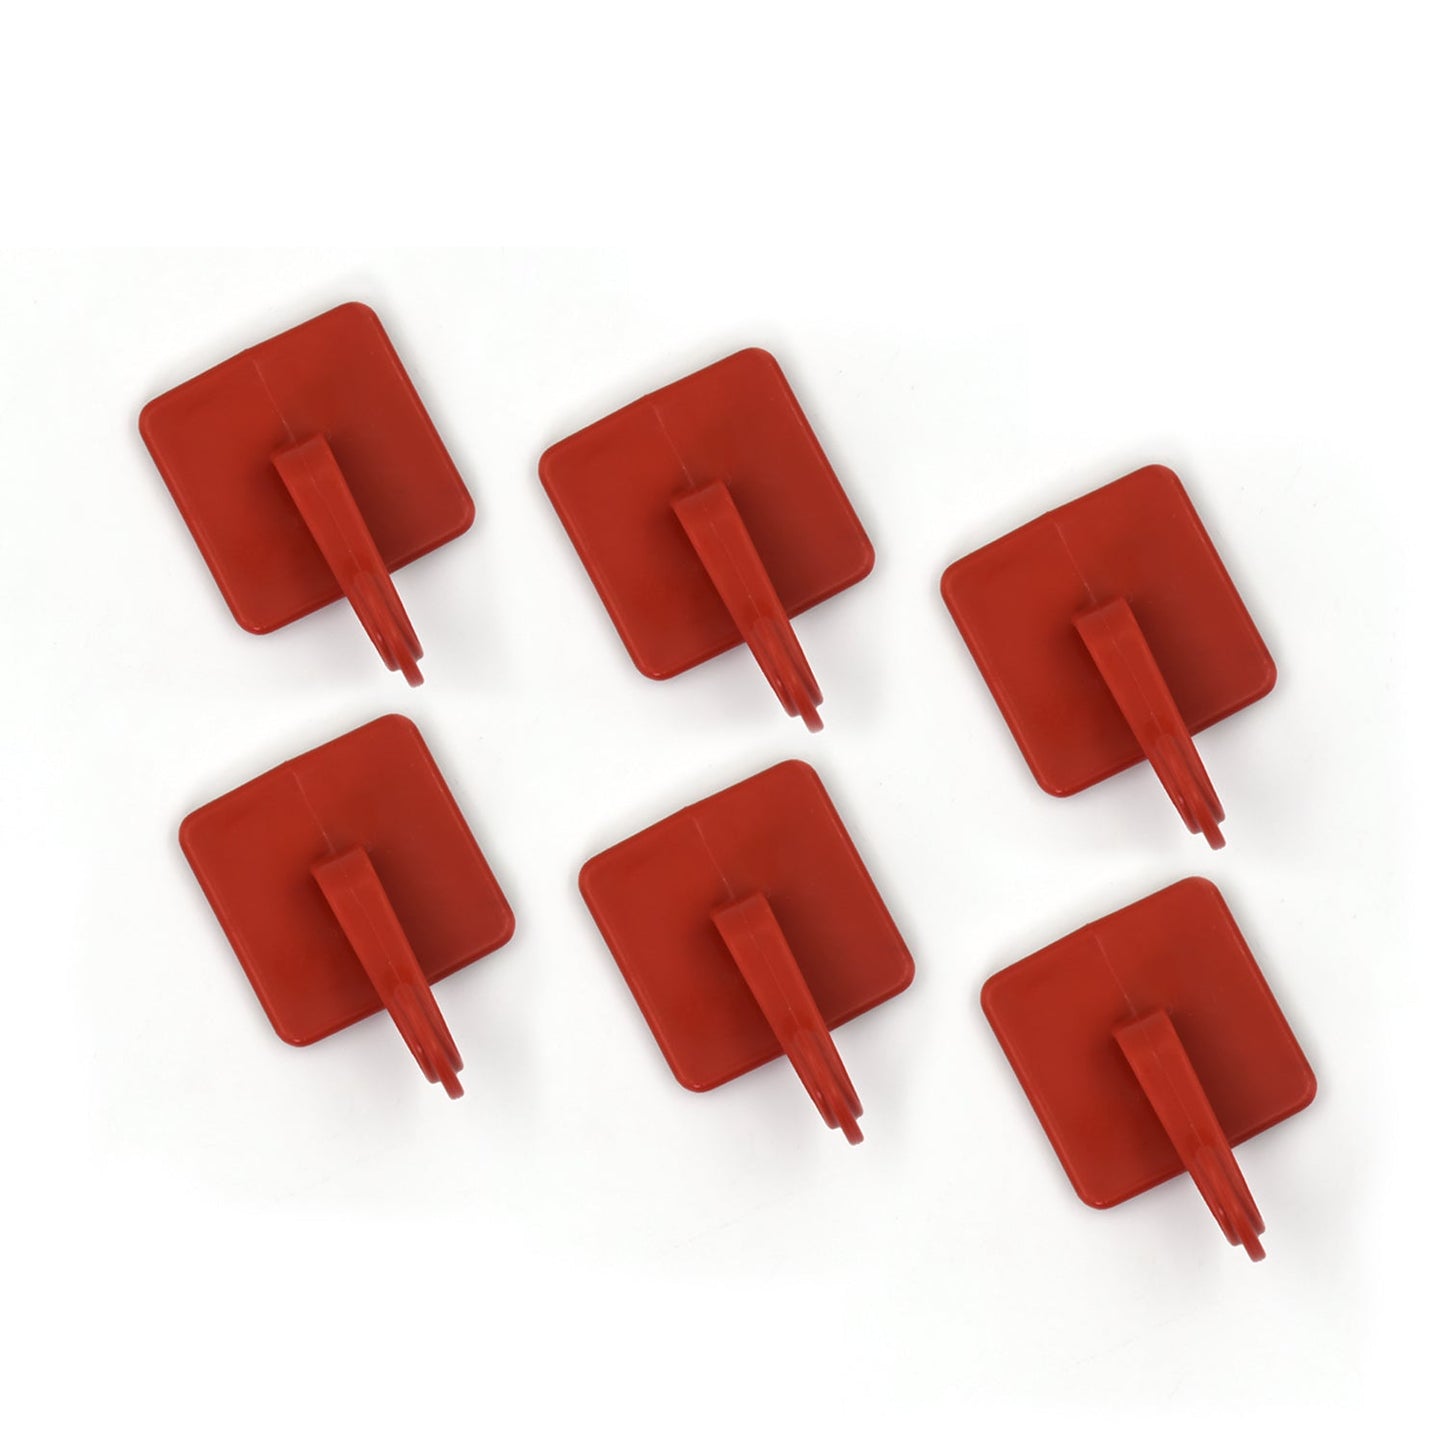 Self Adhesive Sticker Wall Hooks (Pack Of 6)